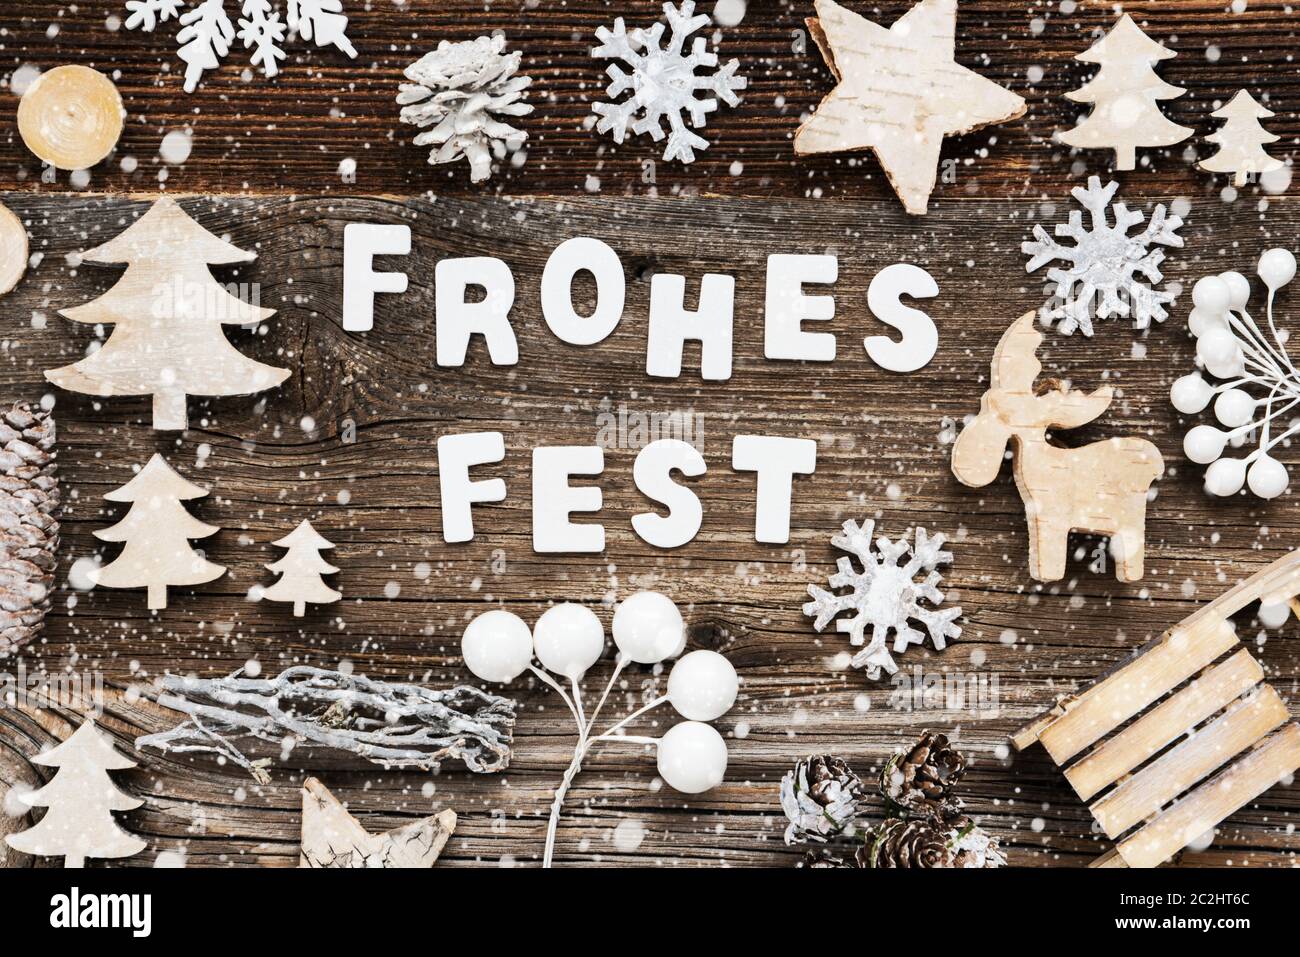 White Letters Building The Word Frohes Fest Means Merry Christmas. Wooden Christmas Decoration Like Sled And Tree And Star. Brown Wooden Background Wi Stock Photo